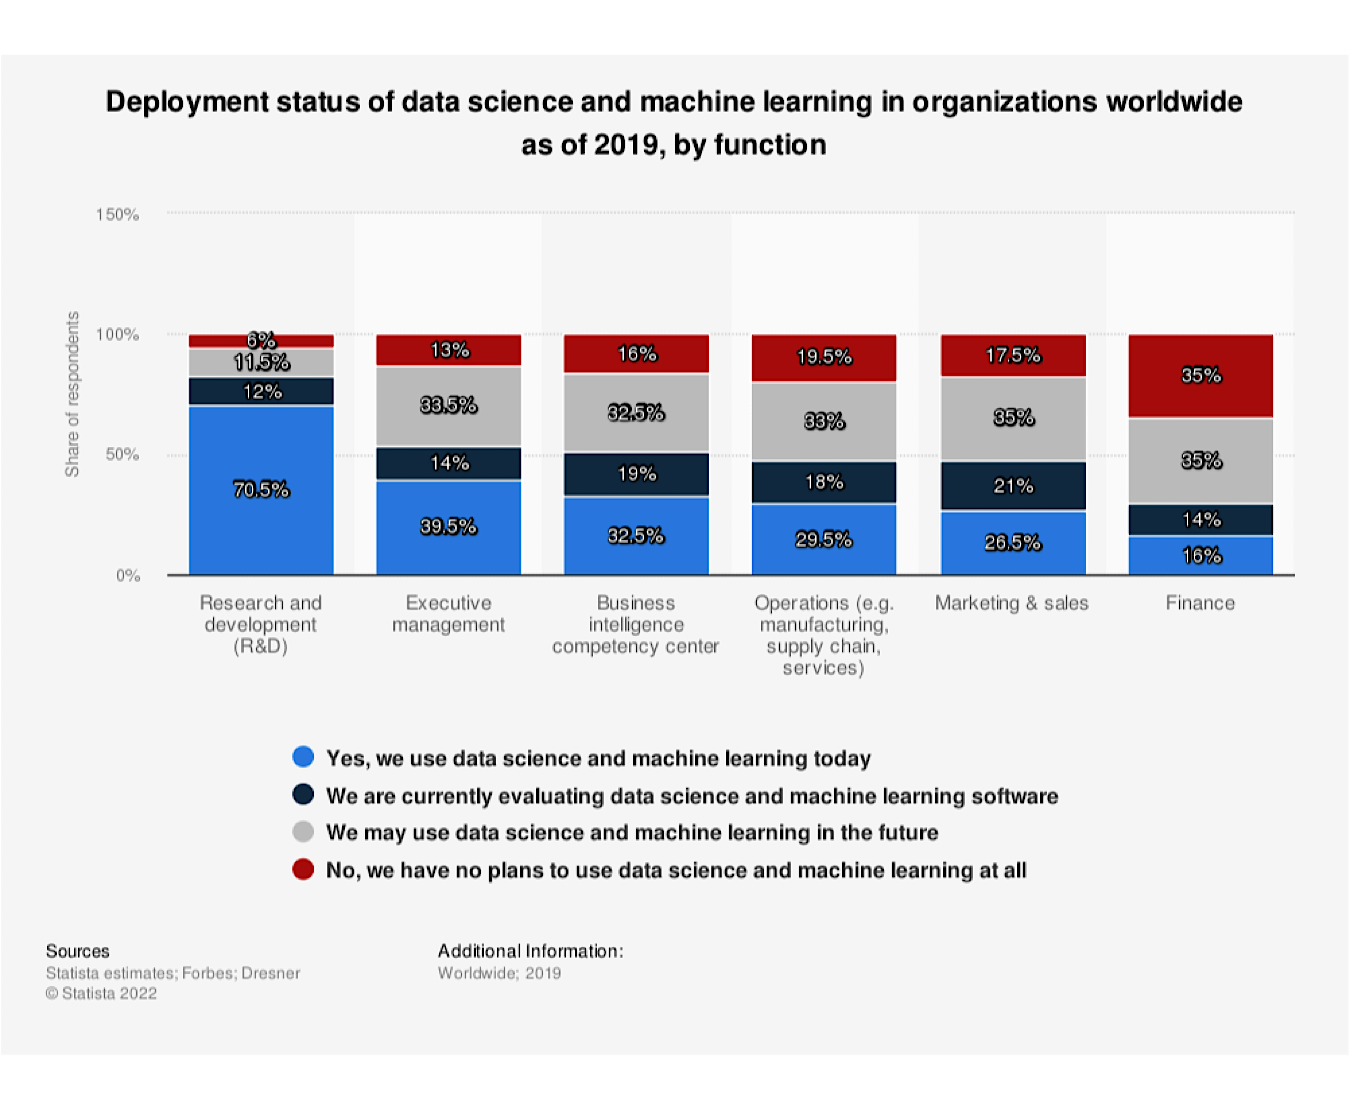 Visual representation (stacked bar graph) of data on the percentage of organizations' use of data science and machine learning.